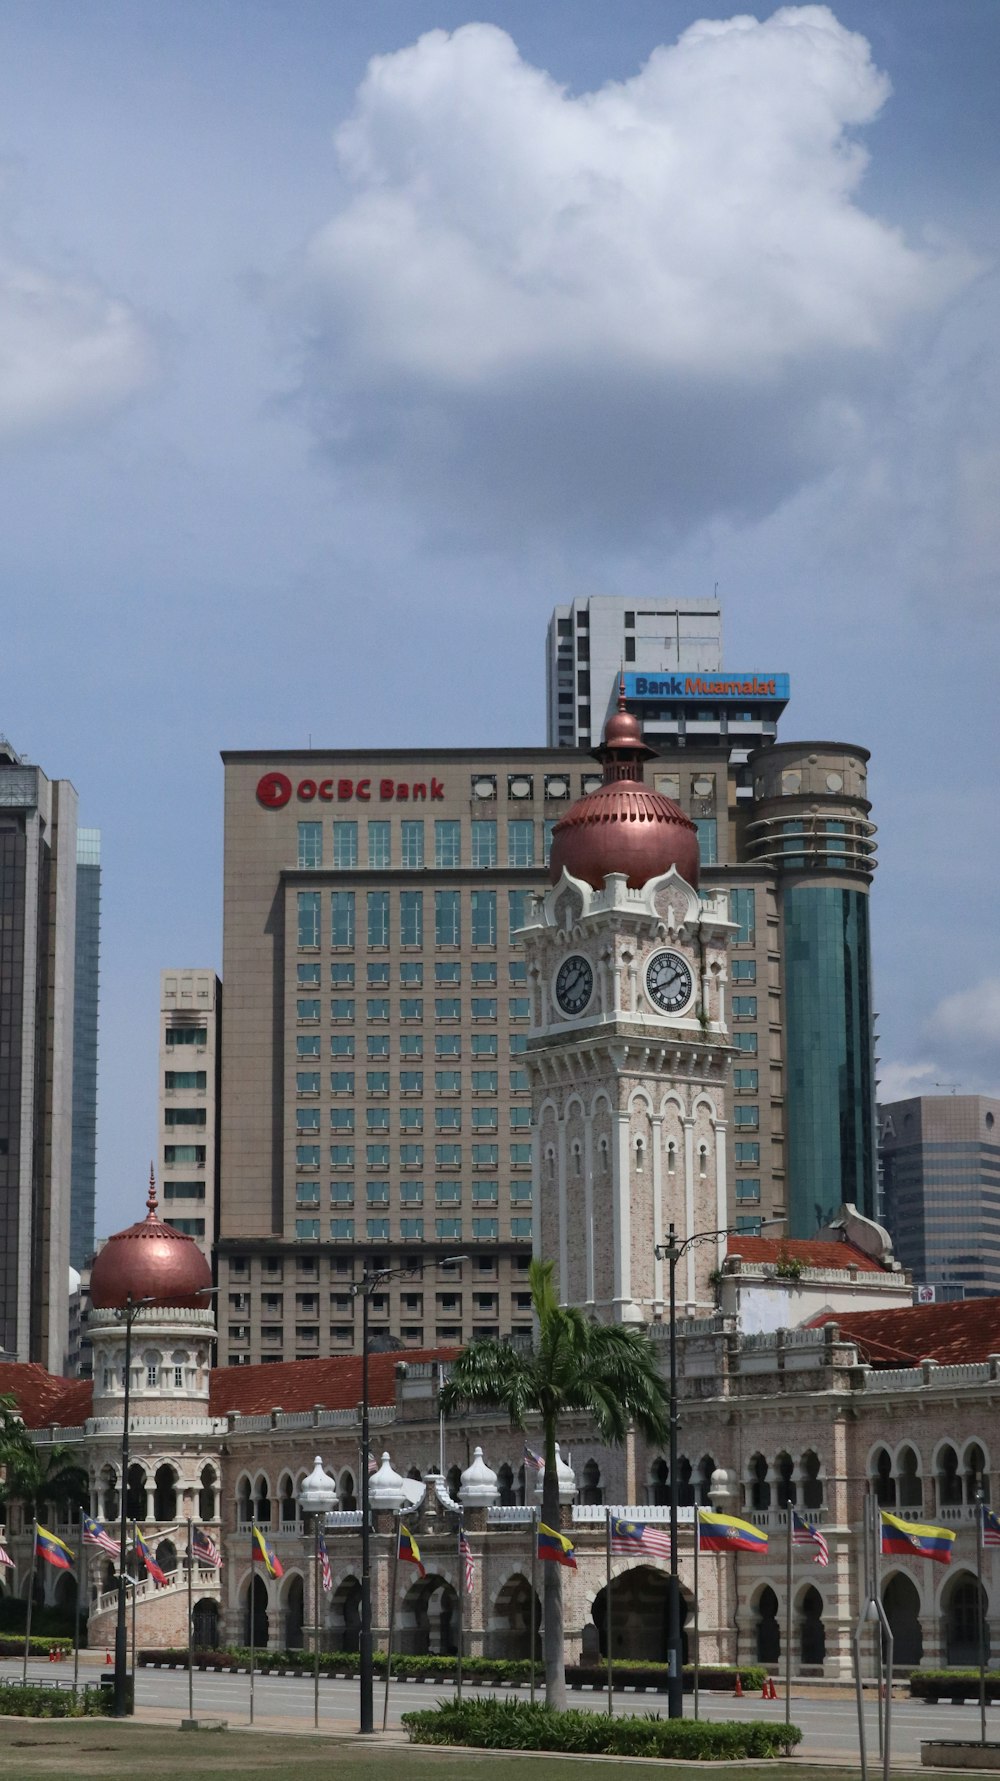 a large building with a clock tower in the middle of a city